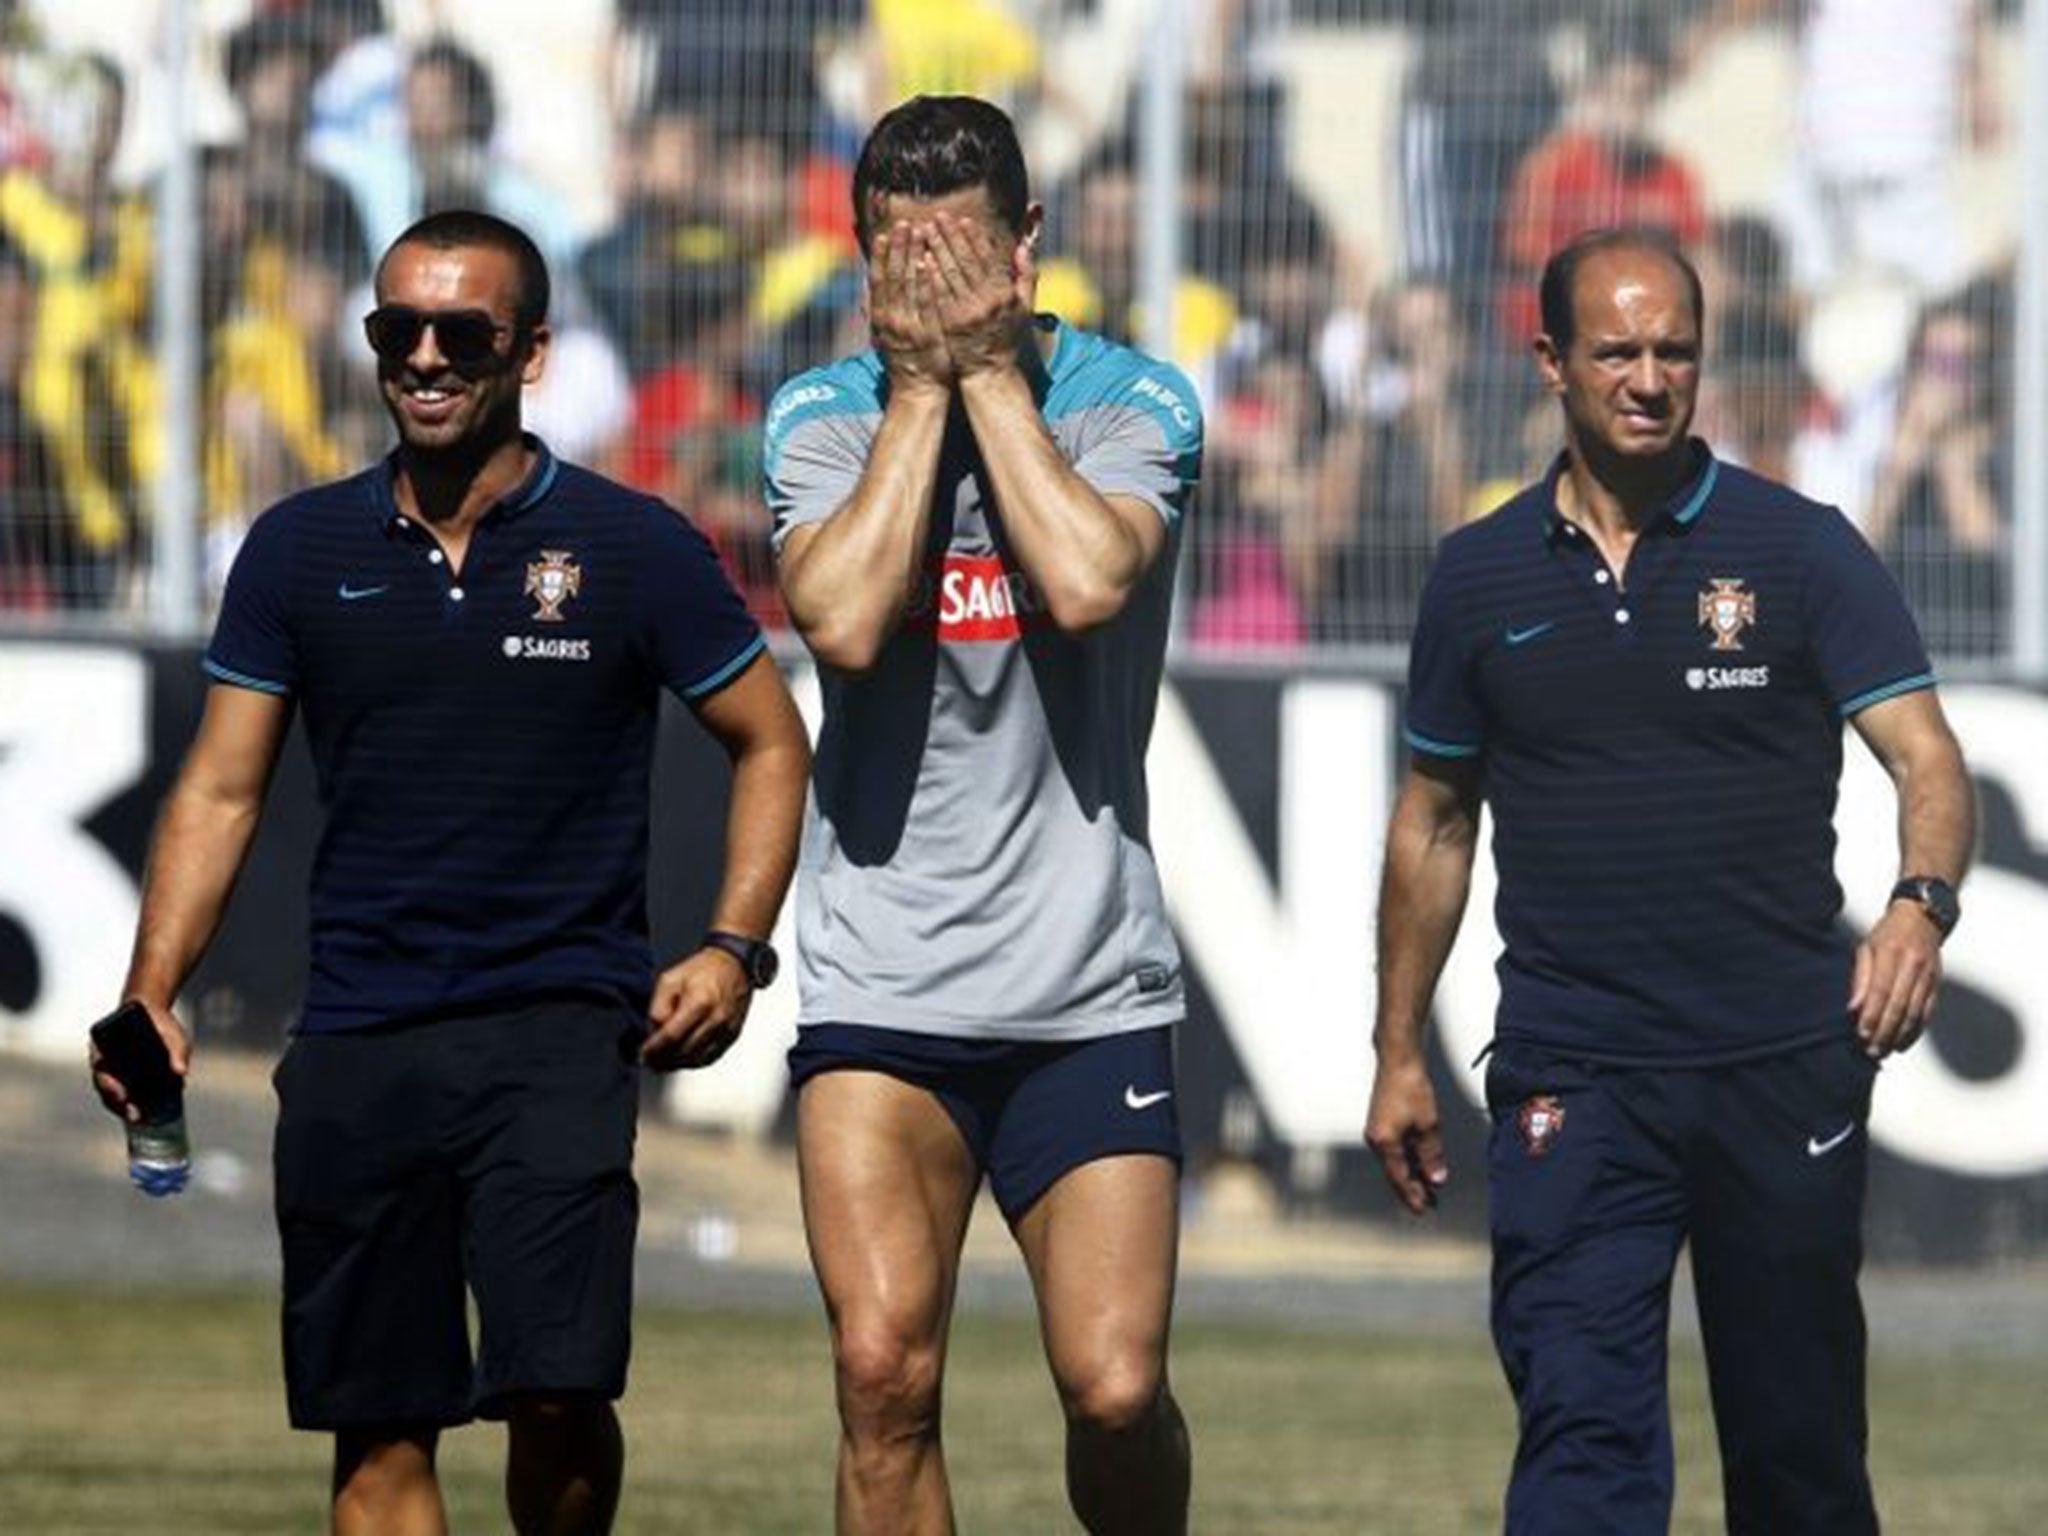 Cristiano Ronaldo covers his face as he limps out of a Portugal training session